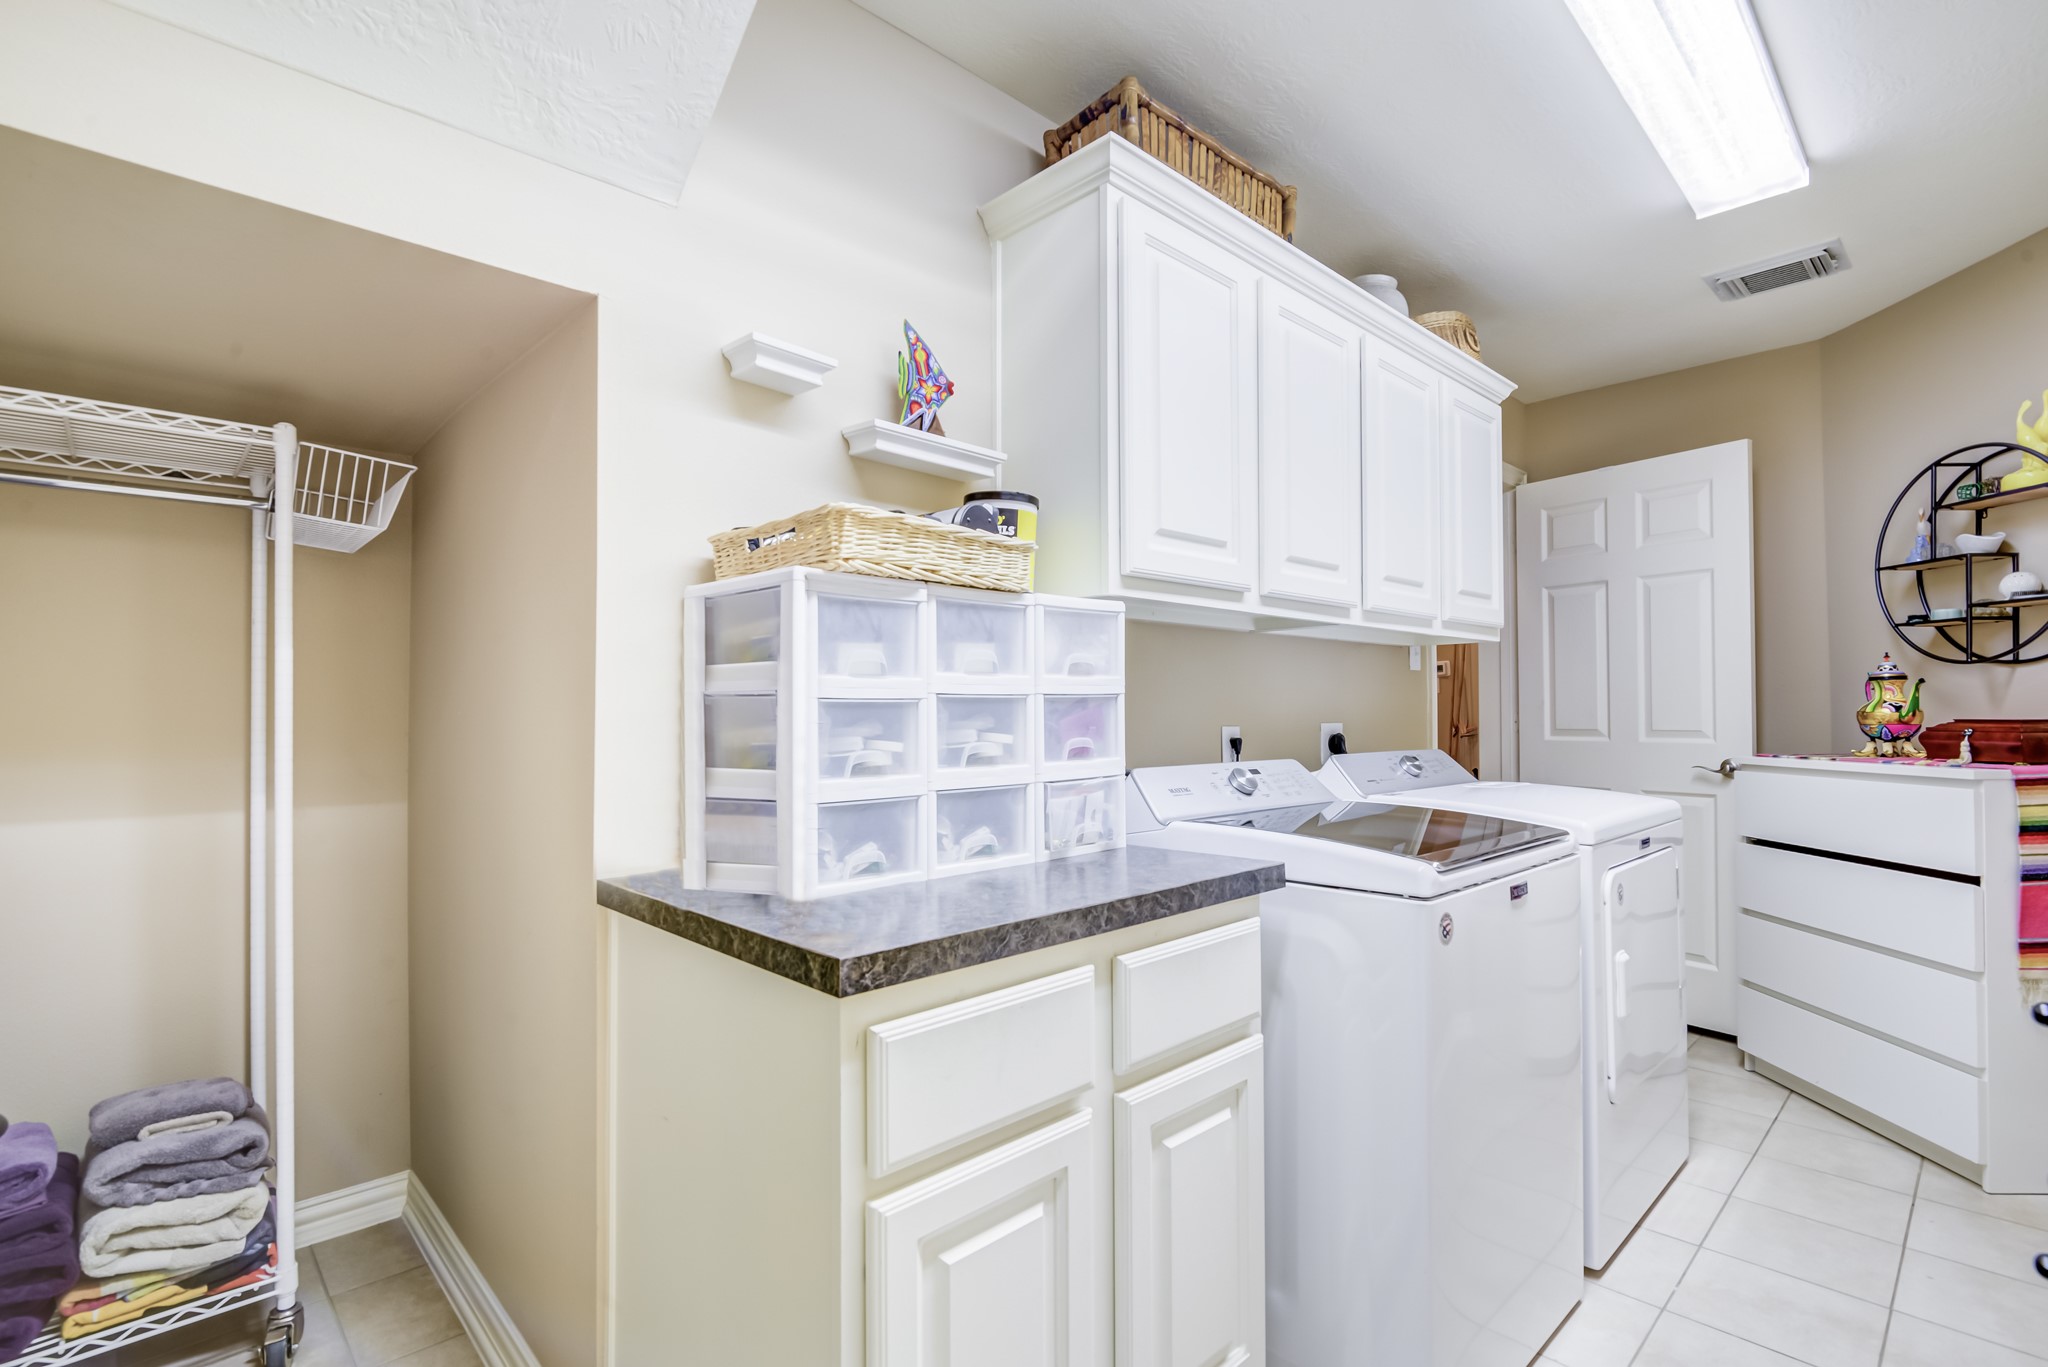 Full guest bathroom located between two guest rooms. Granite counter top, under mount sink, tub/shower combo.